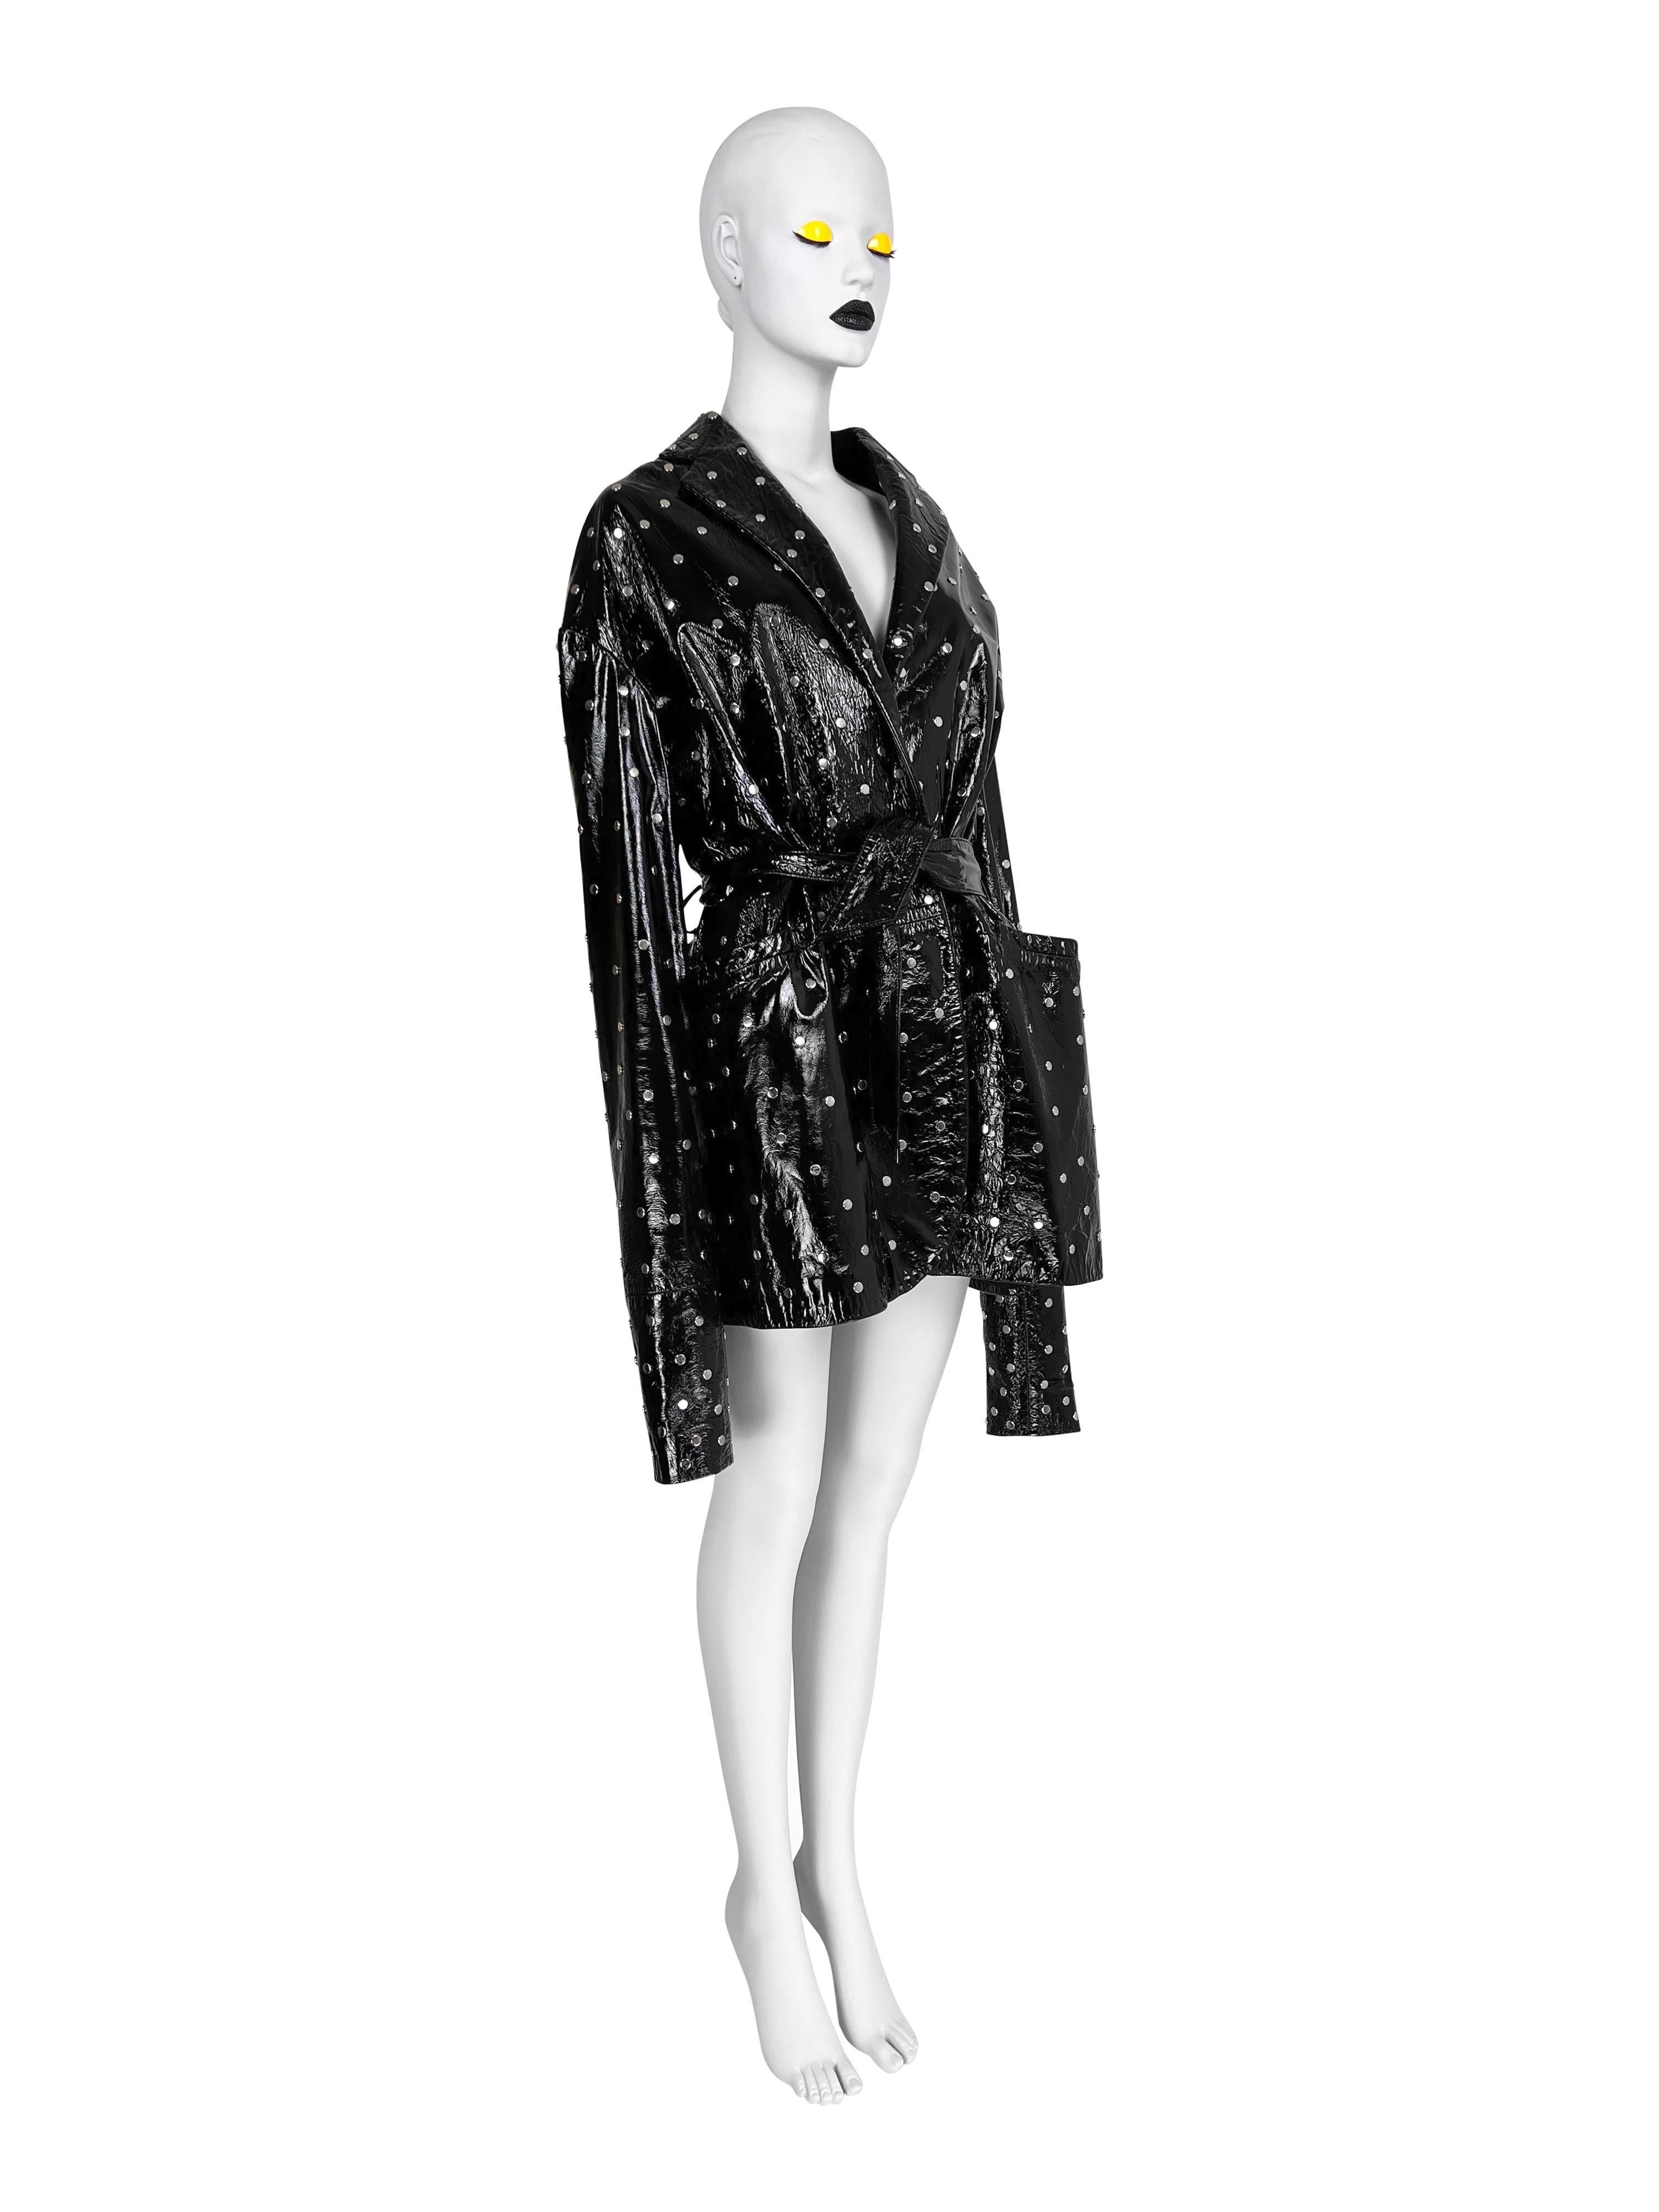  Spring 1991 Dolce & Gabbana Patent Leather Coat In Good Condition For Sale In Prague, CZ